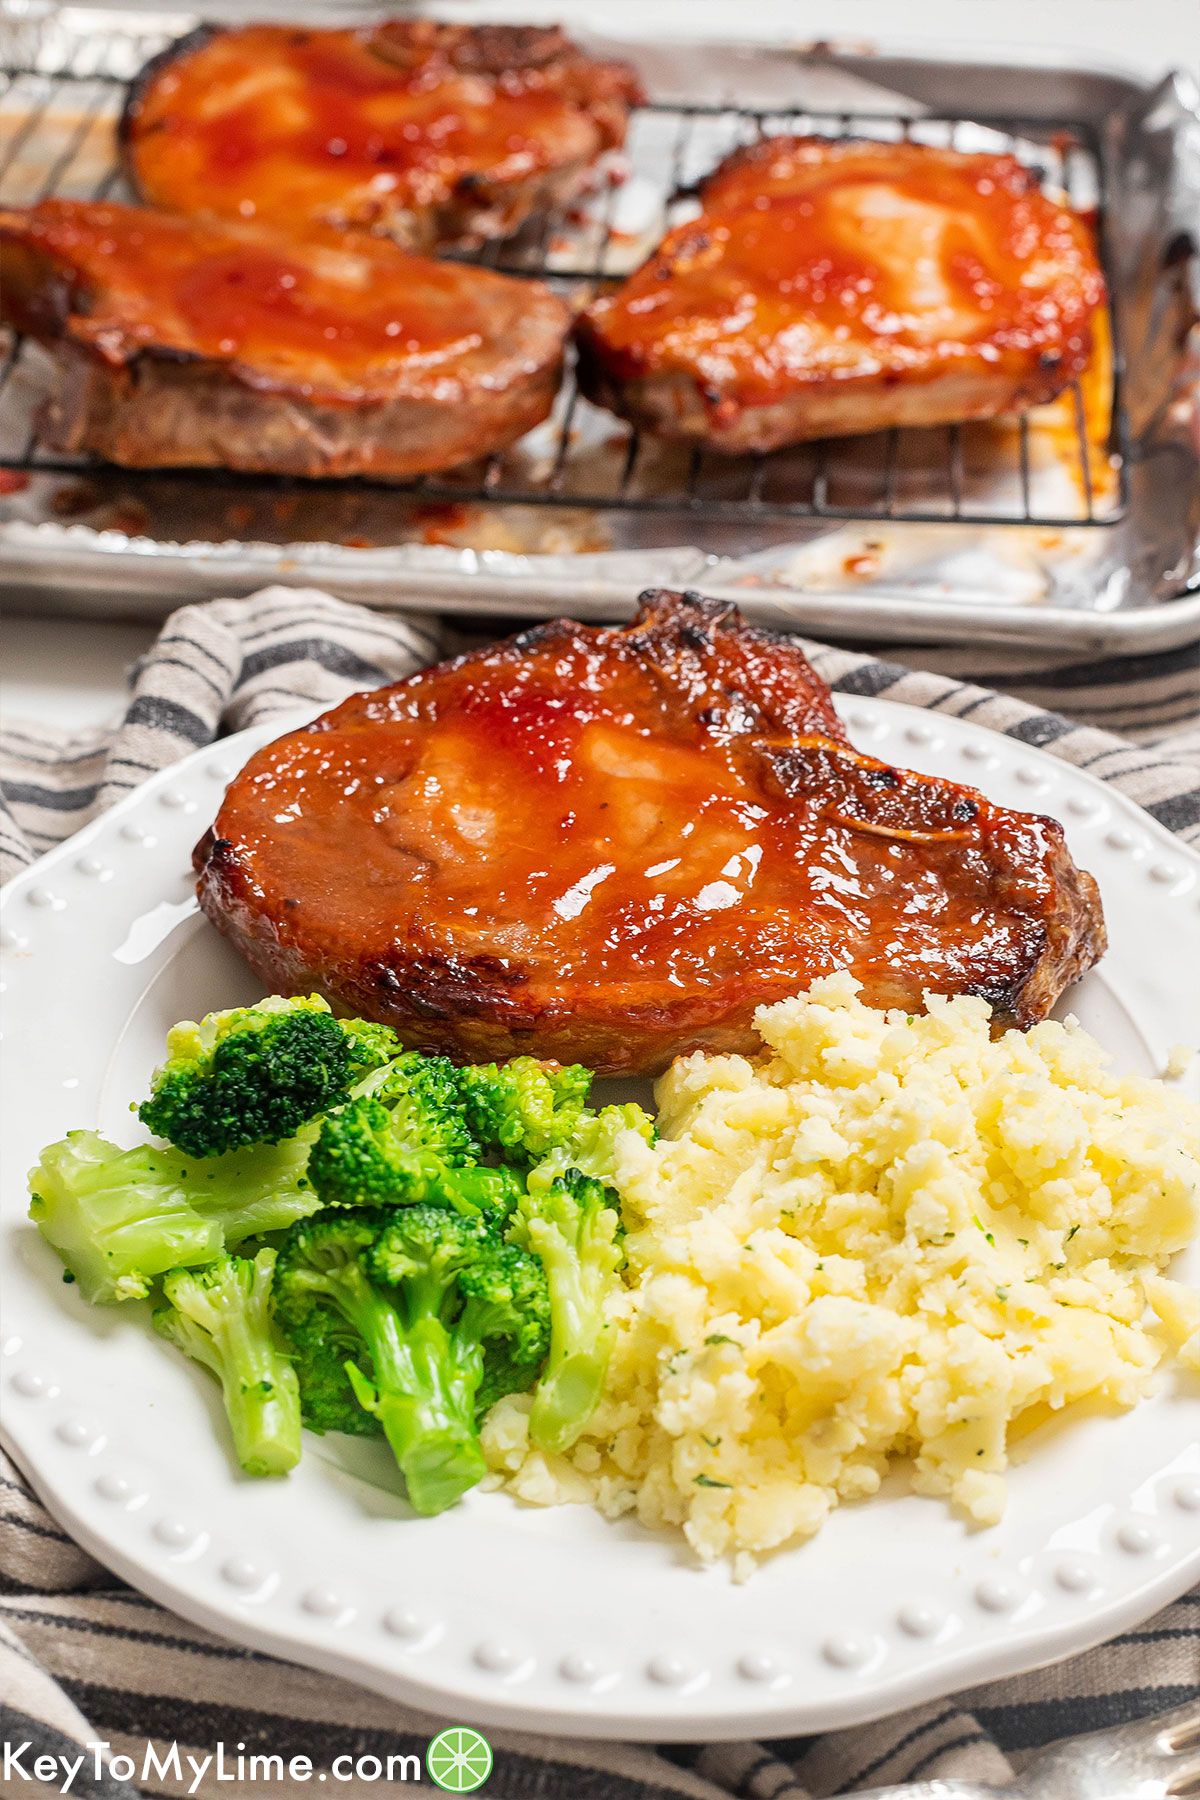 A side shot image showing the texture of the pork chop next to a side of mashed potatoes and broccoli.